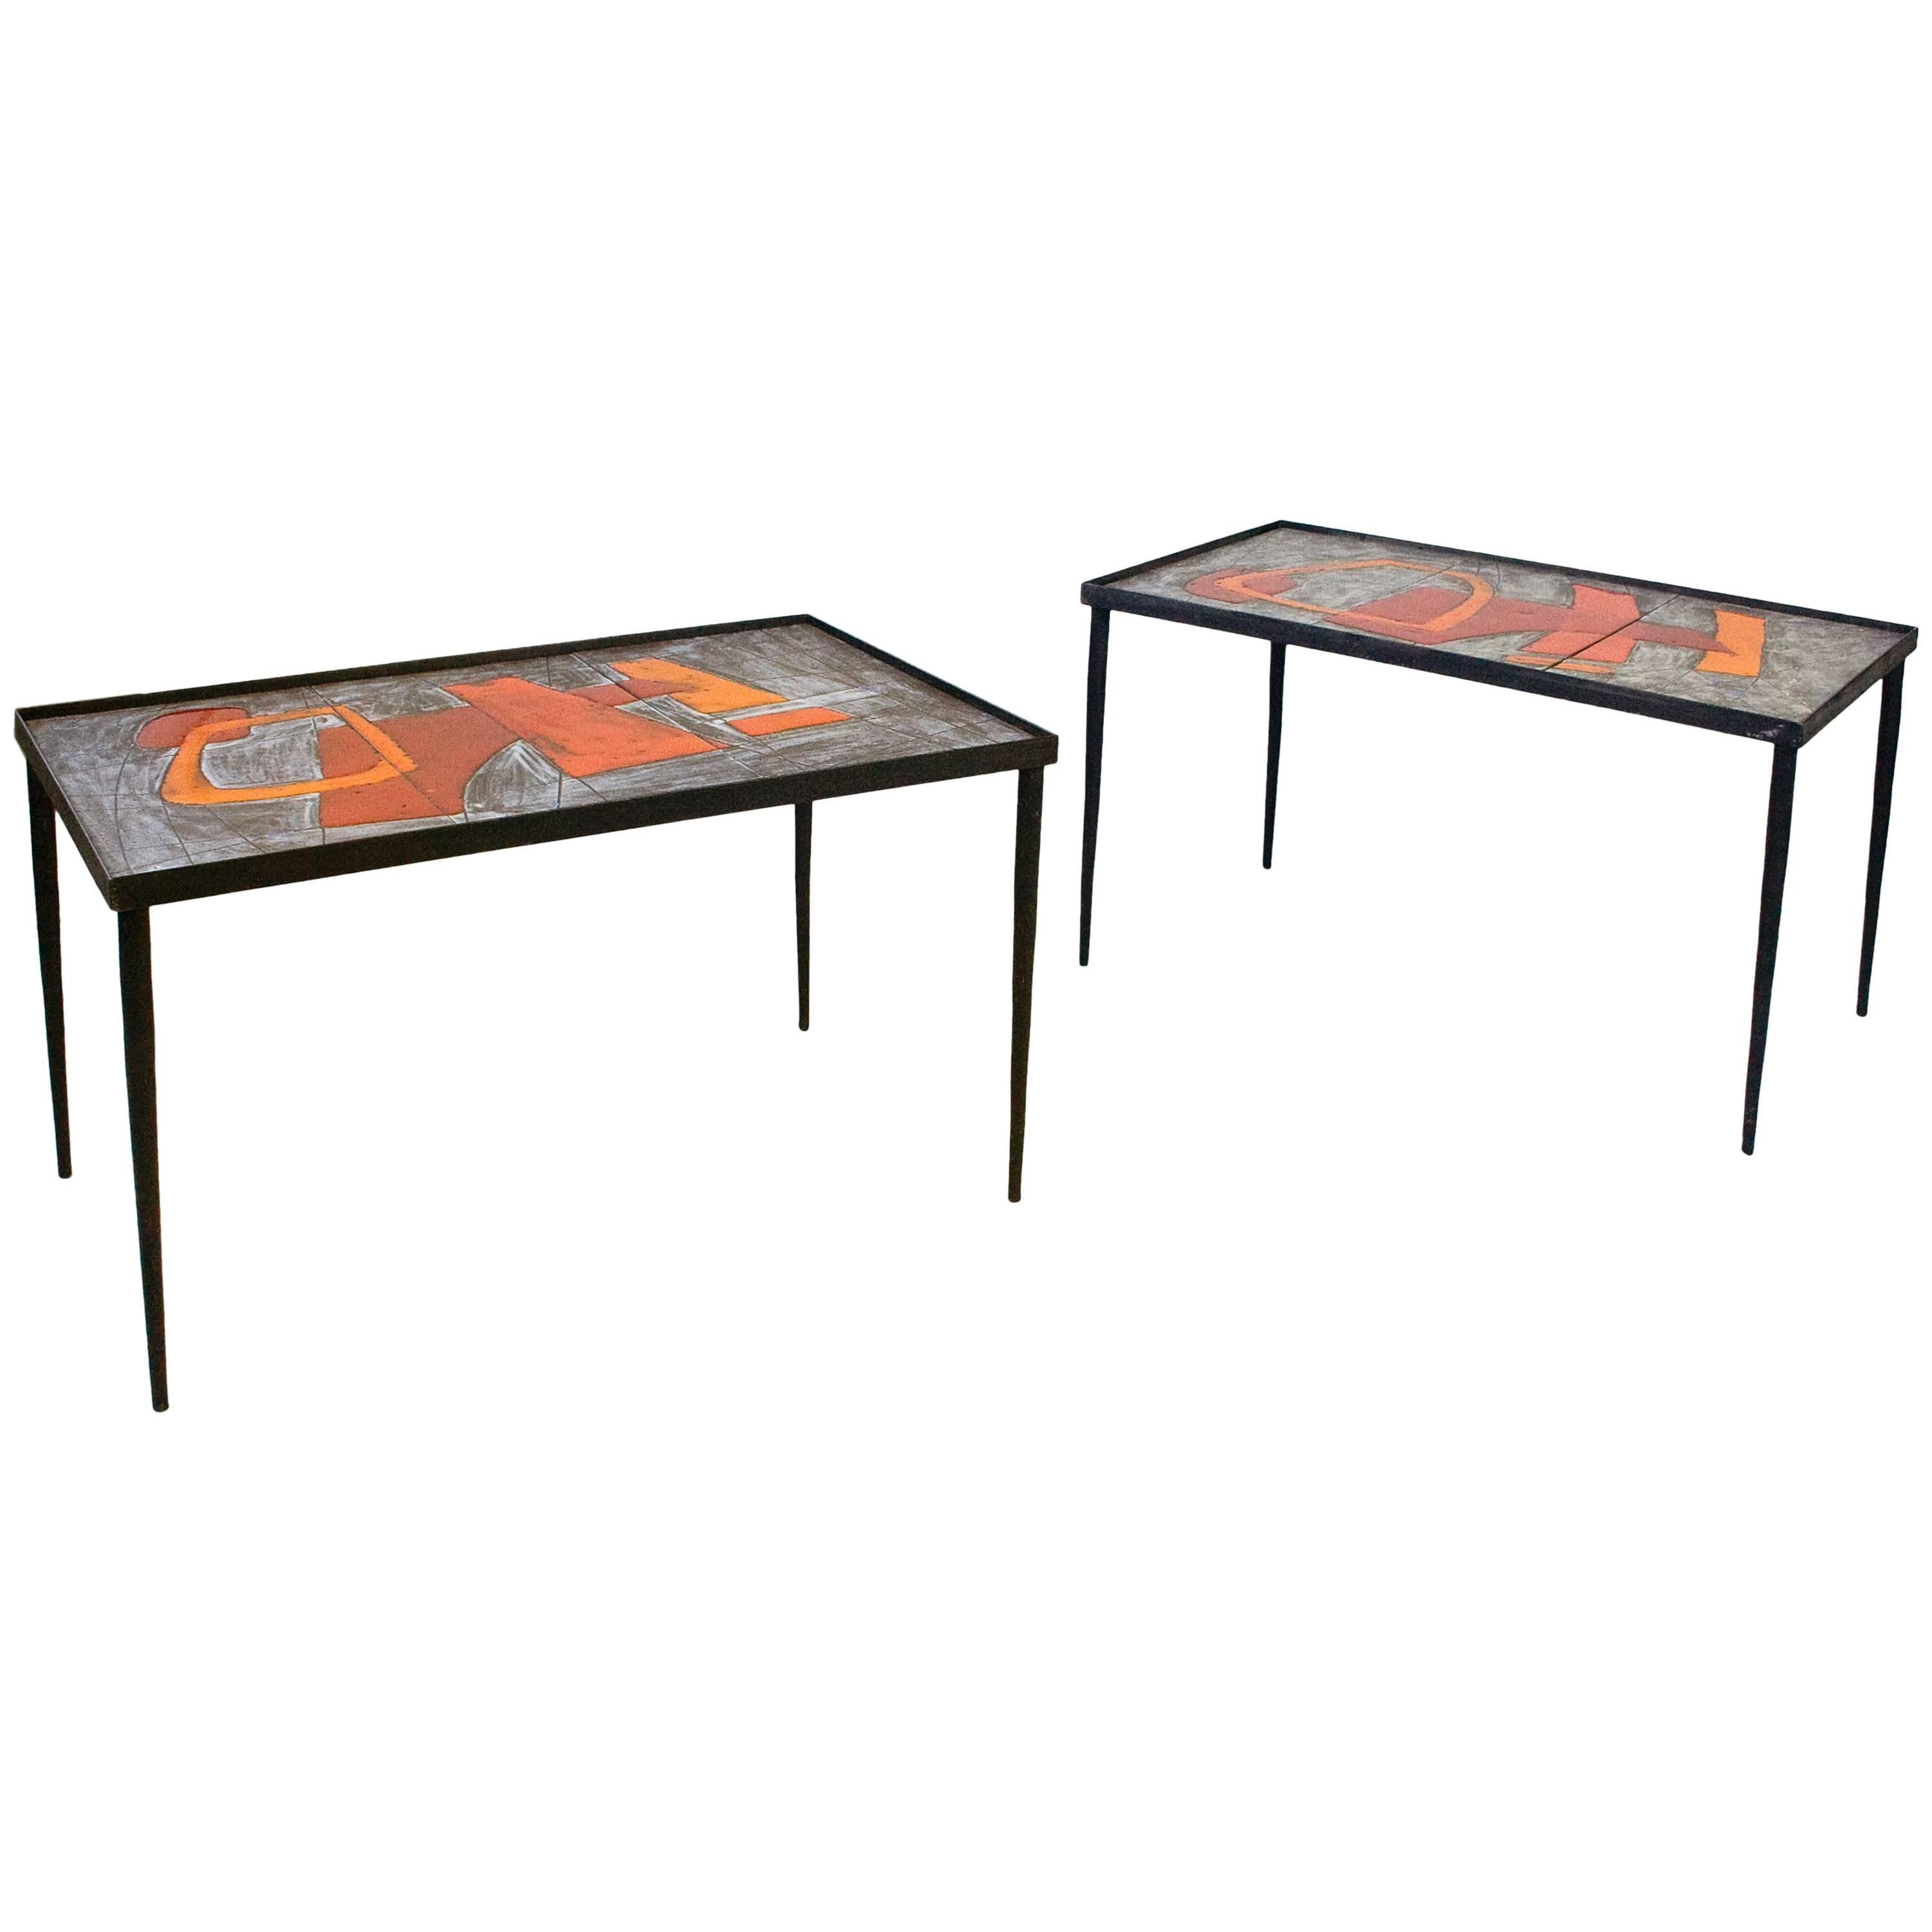 Pair of Robert and Jean Cloutier Ceramic Coffee Tables, circa 1960, France